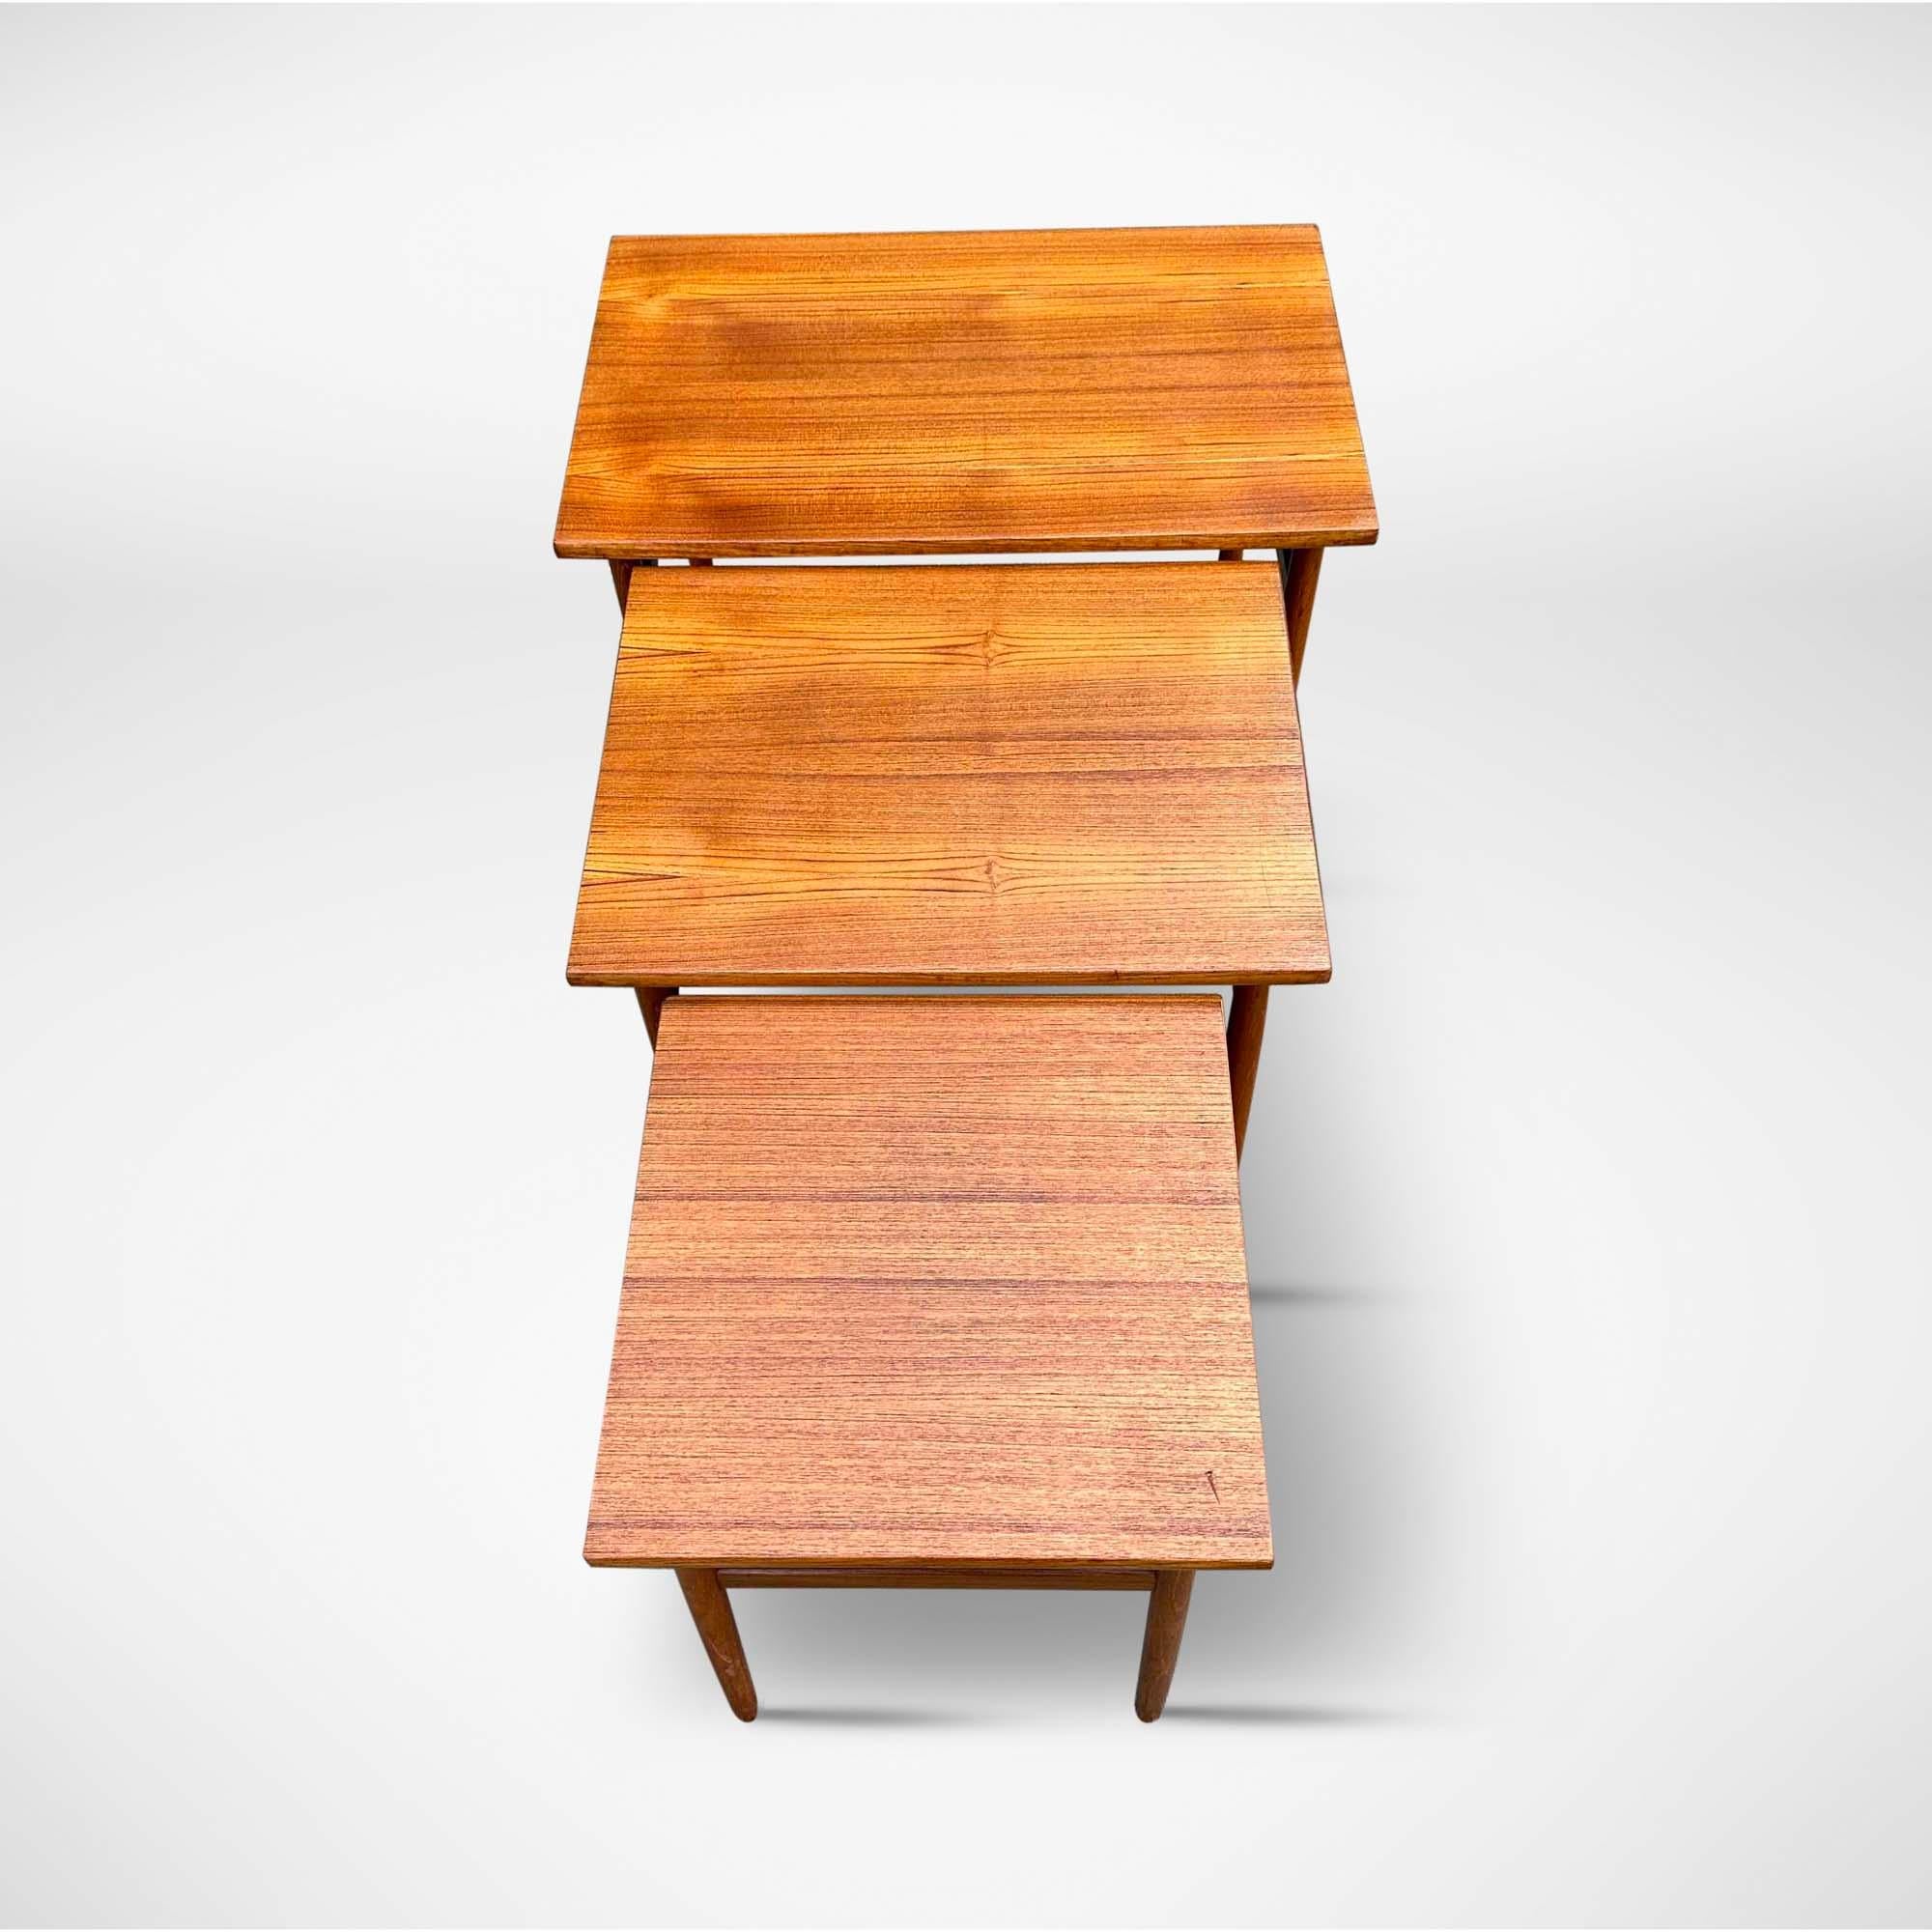 Set of 3 mid-century side tables with refined tapered legs. These nesting tables were designed by Dane Kai Kristiansen, circa 1960.  The coffee tables slide into each other, making them easy to put away. 

Denmark, 1960s

Designer/manufacturer: Kai